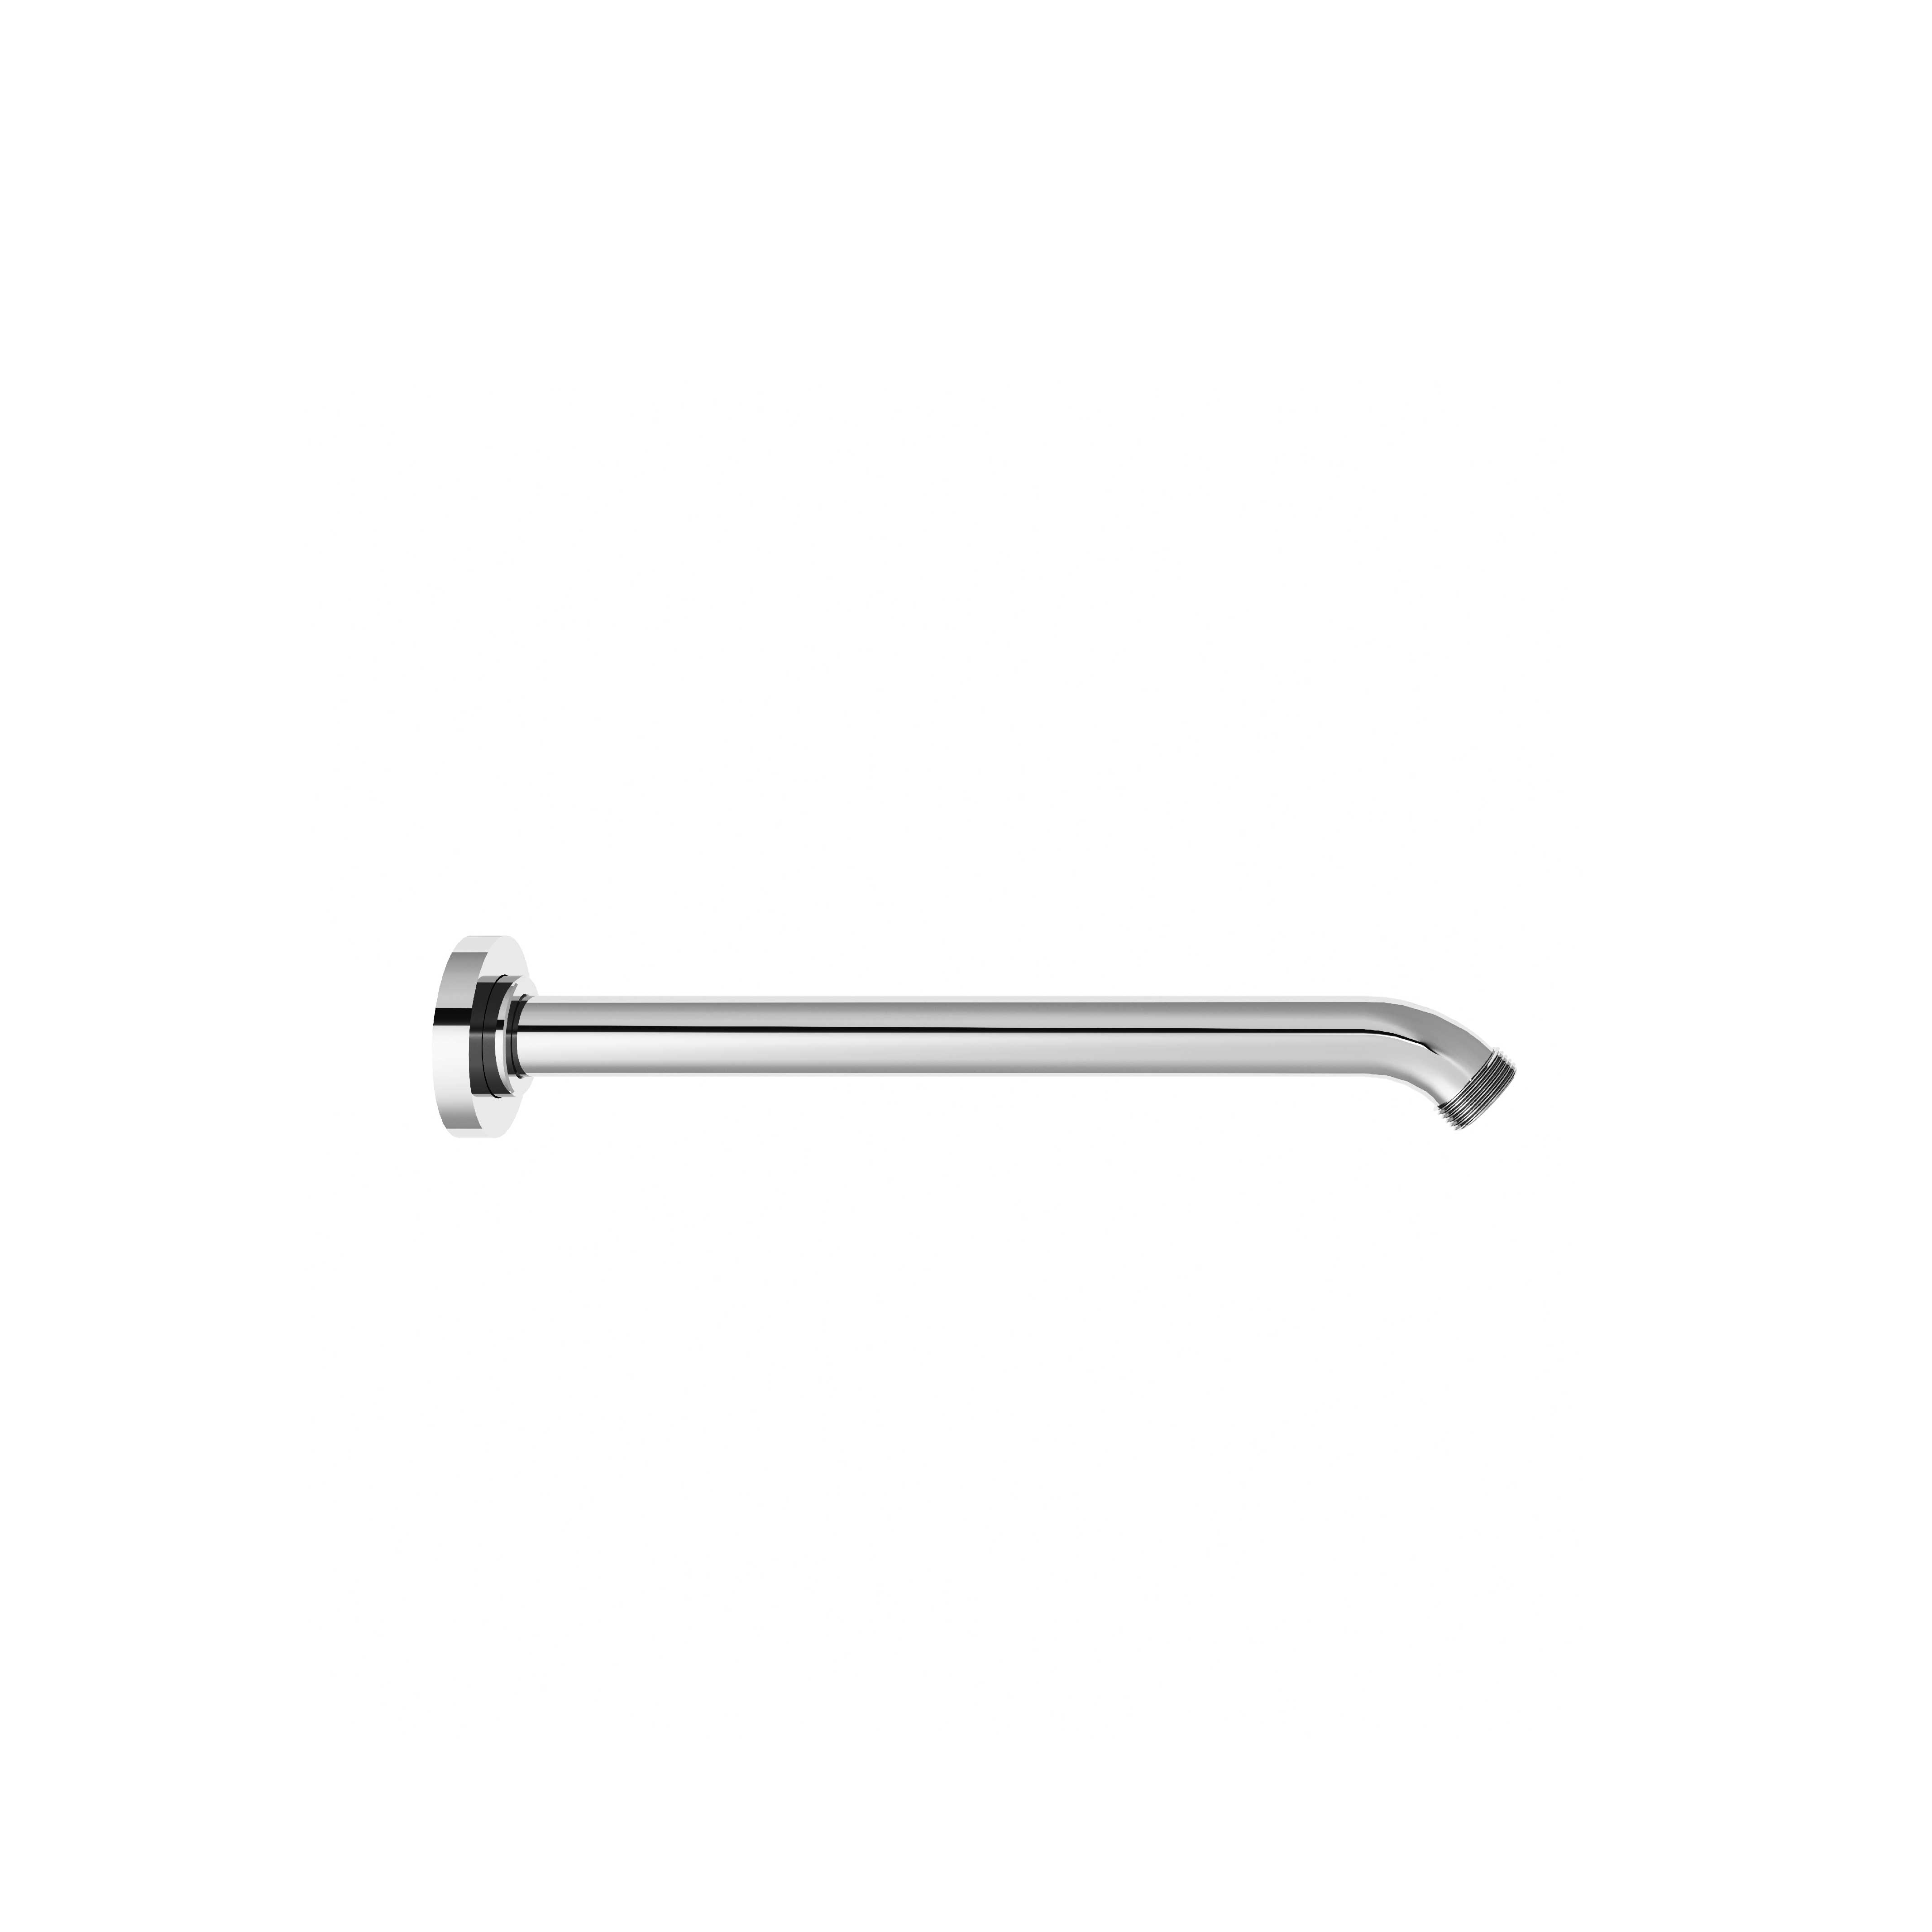 M90-2W170 Wall mounted shower arm 170mm